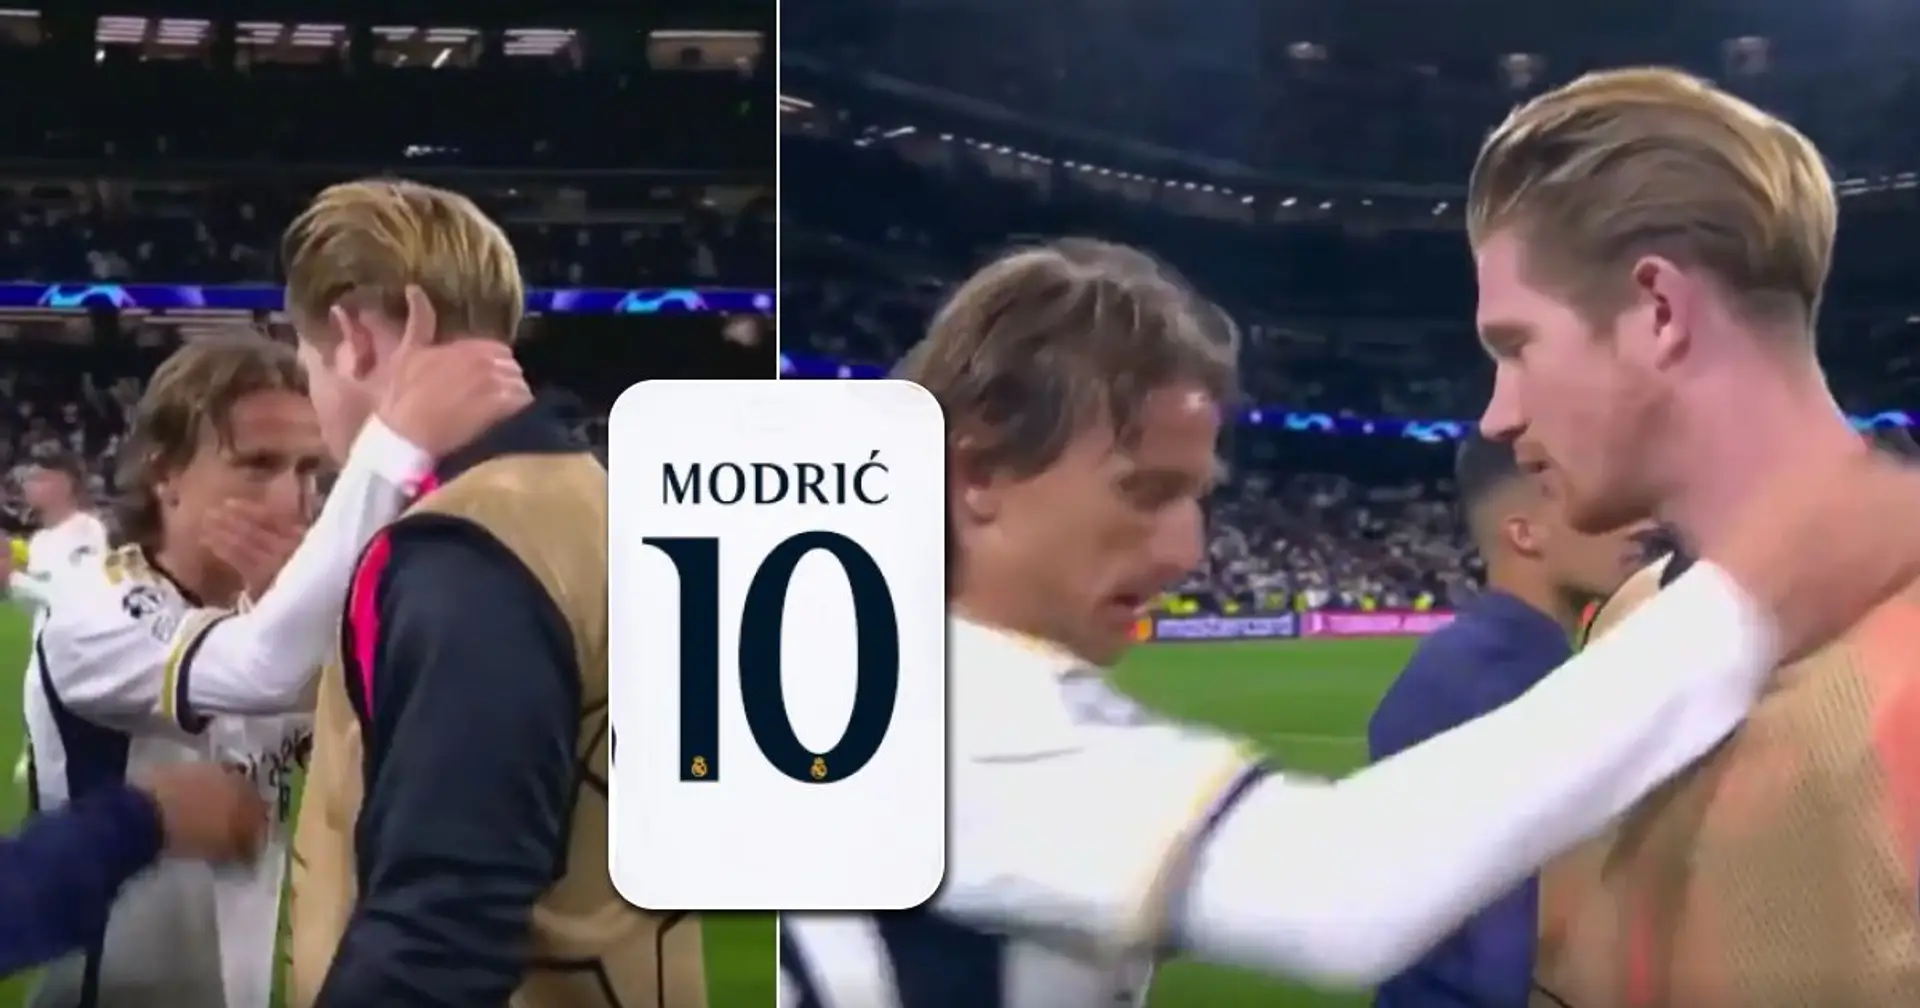 De Bruyne asks for Modric's jersey at full time, Luka's reaction spotted